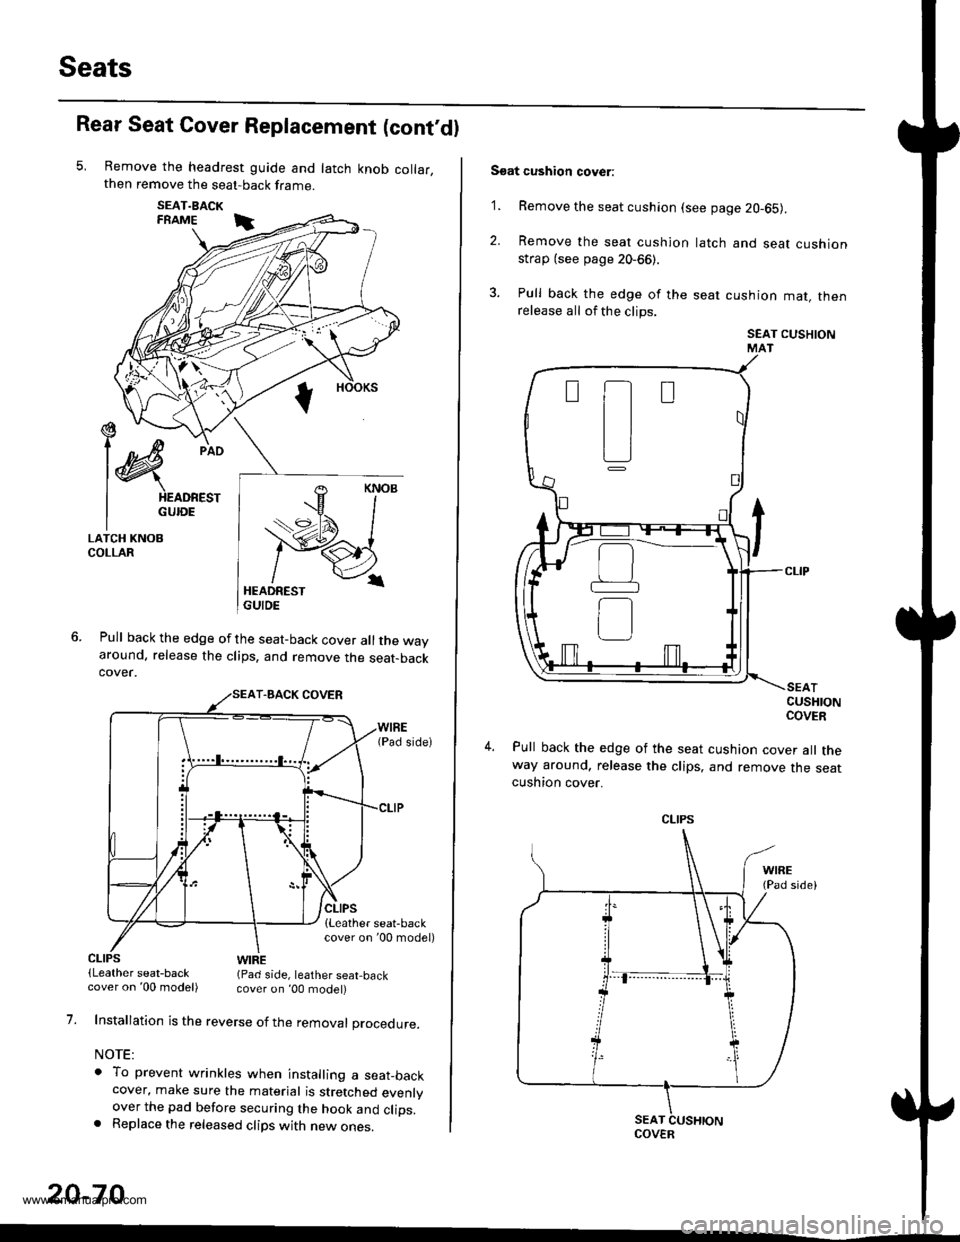 HONDA CR-V 1998 RD1-RD3 / 1.G Workshop Manual 
Seats
Rear Seat Cover Replacement (contdl
Remove the headrest guide and latch knob collar,then remove the seat-back frame.
SEAT.BACKFRAME i
Pull back the edge of the seat-back cover all the wayaroun